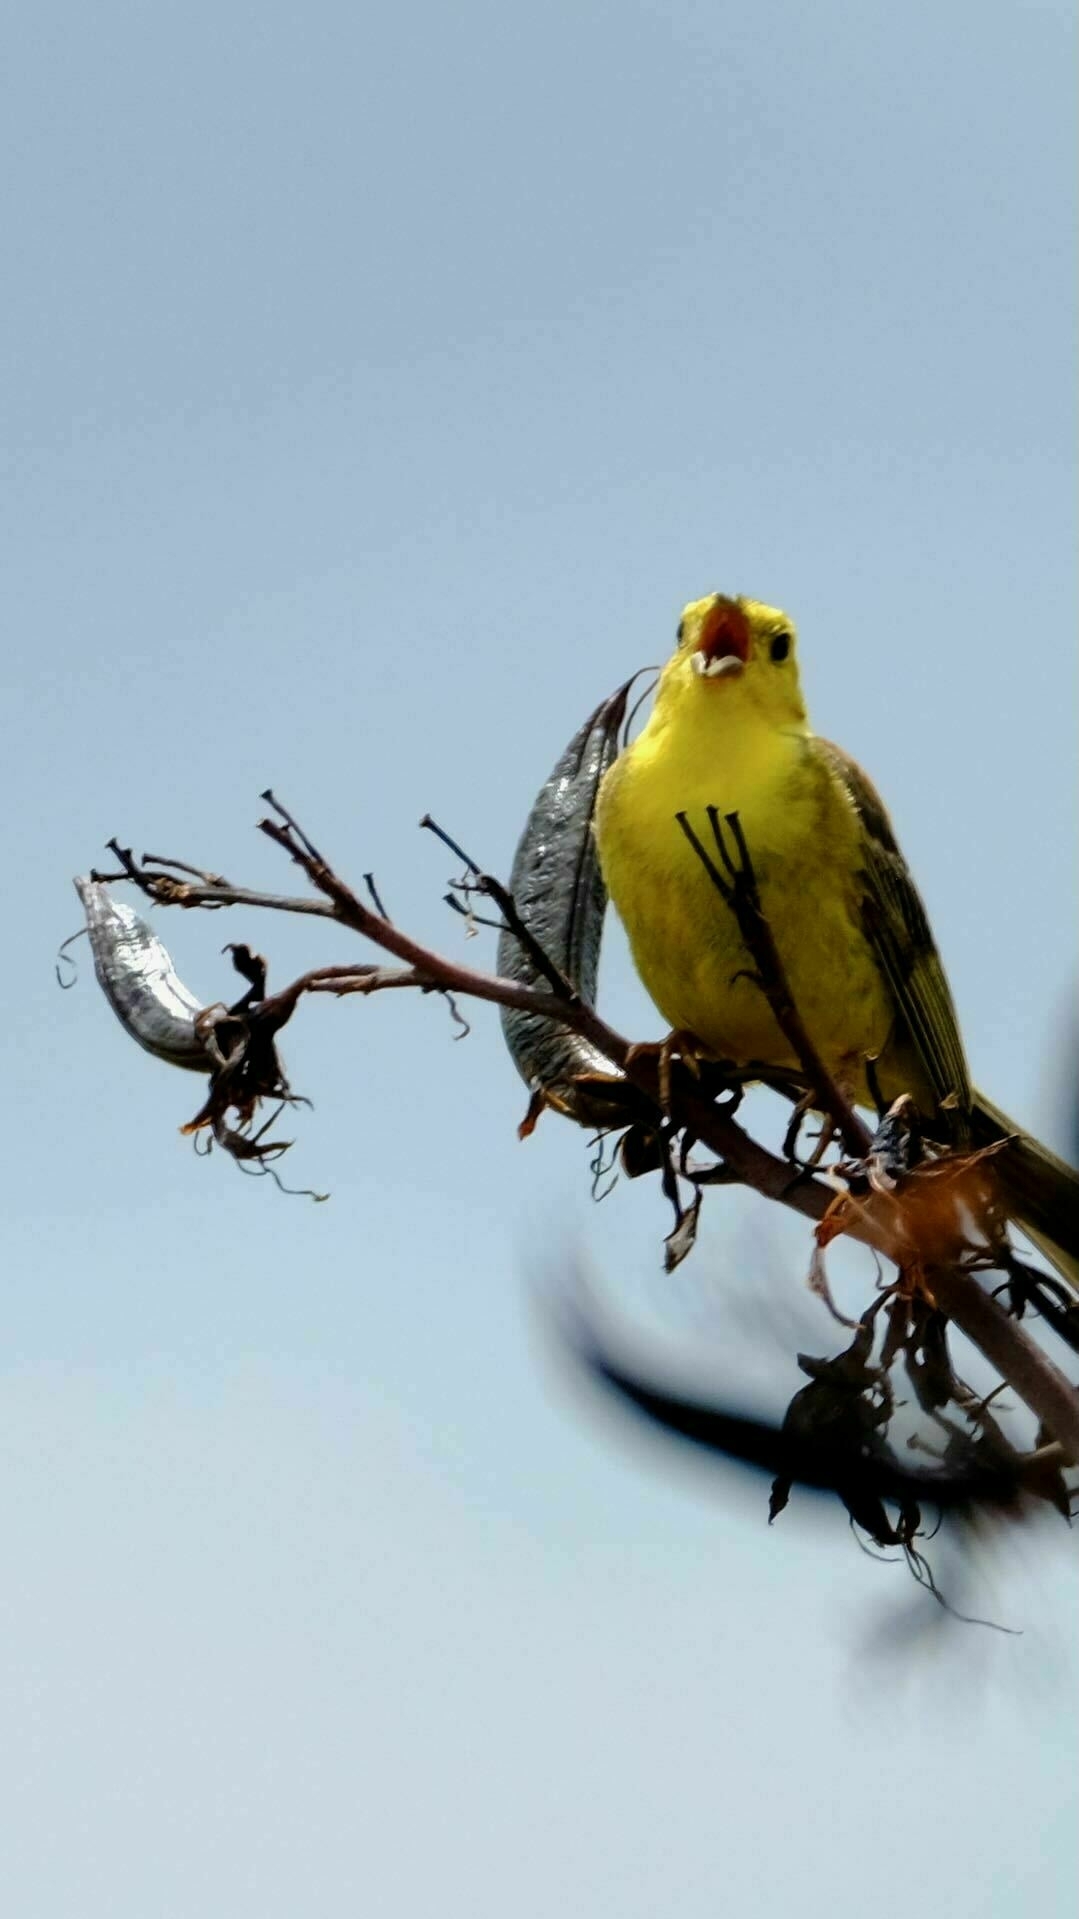 Small bird with very yellow chest and head, with beak wide open. 